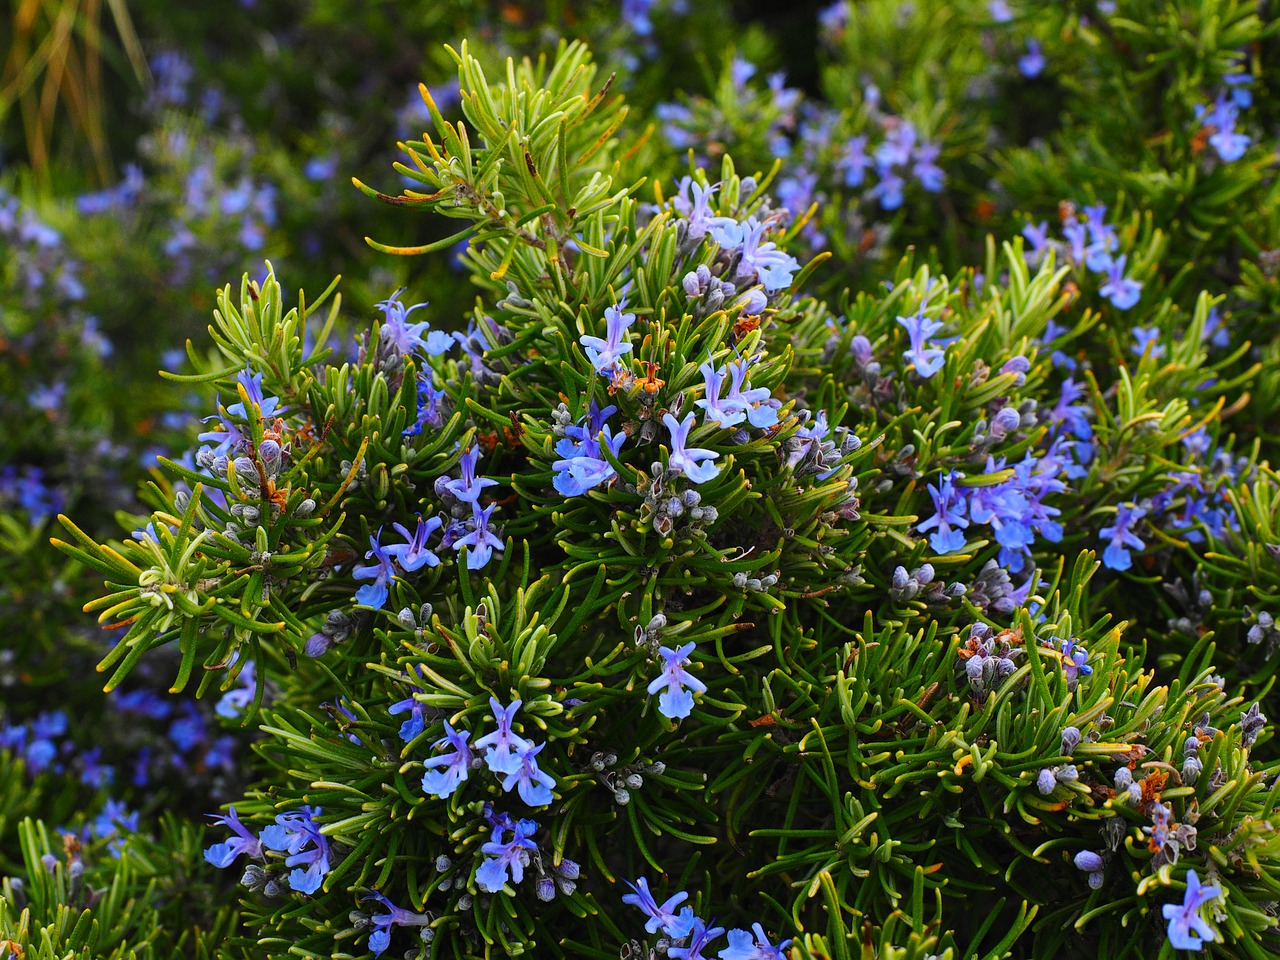 Rosemary extract found to be a powerful anti-hyperglycemic solution for people who have problems with high blood sugar